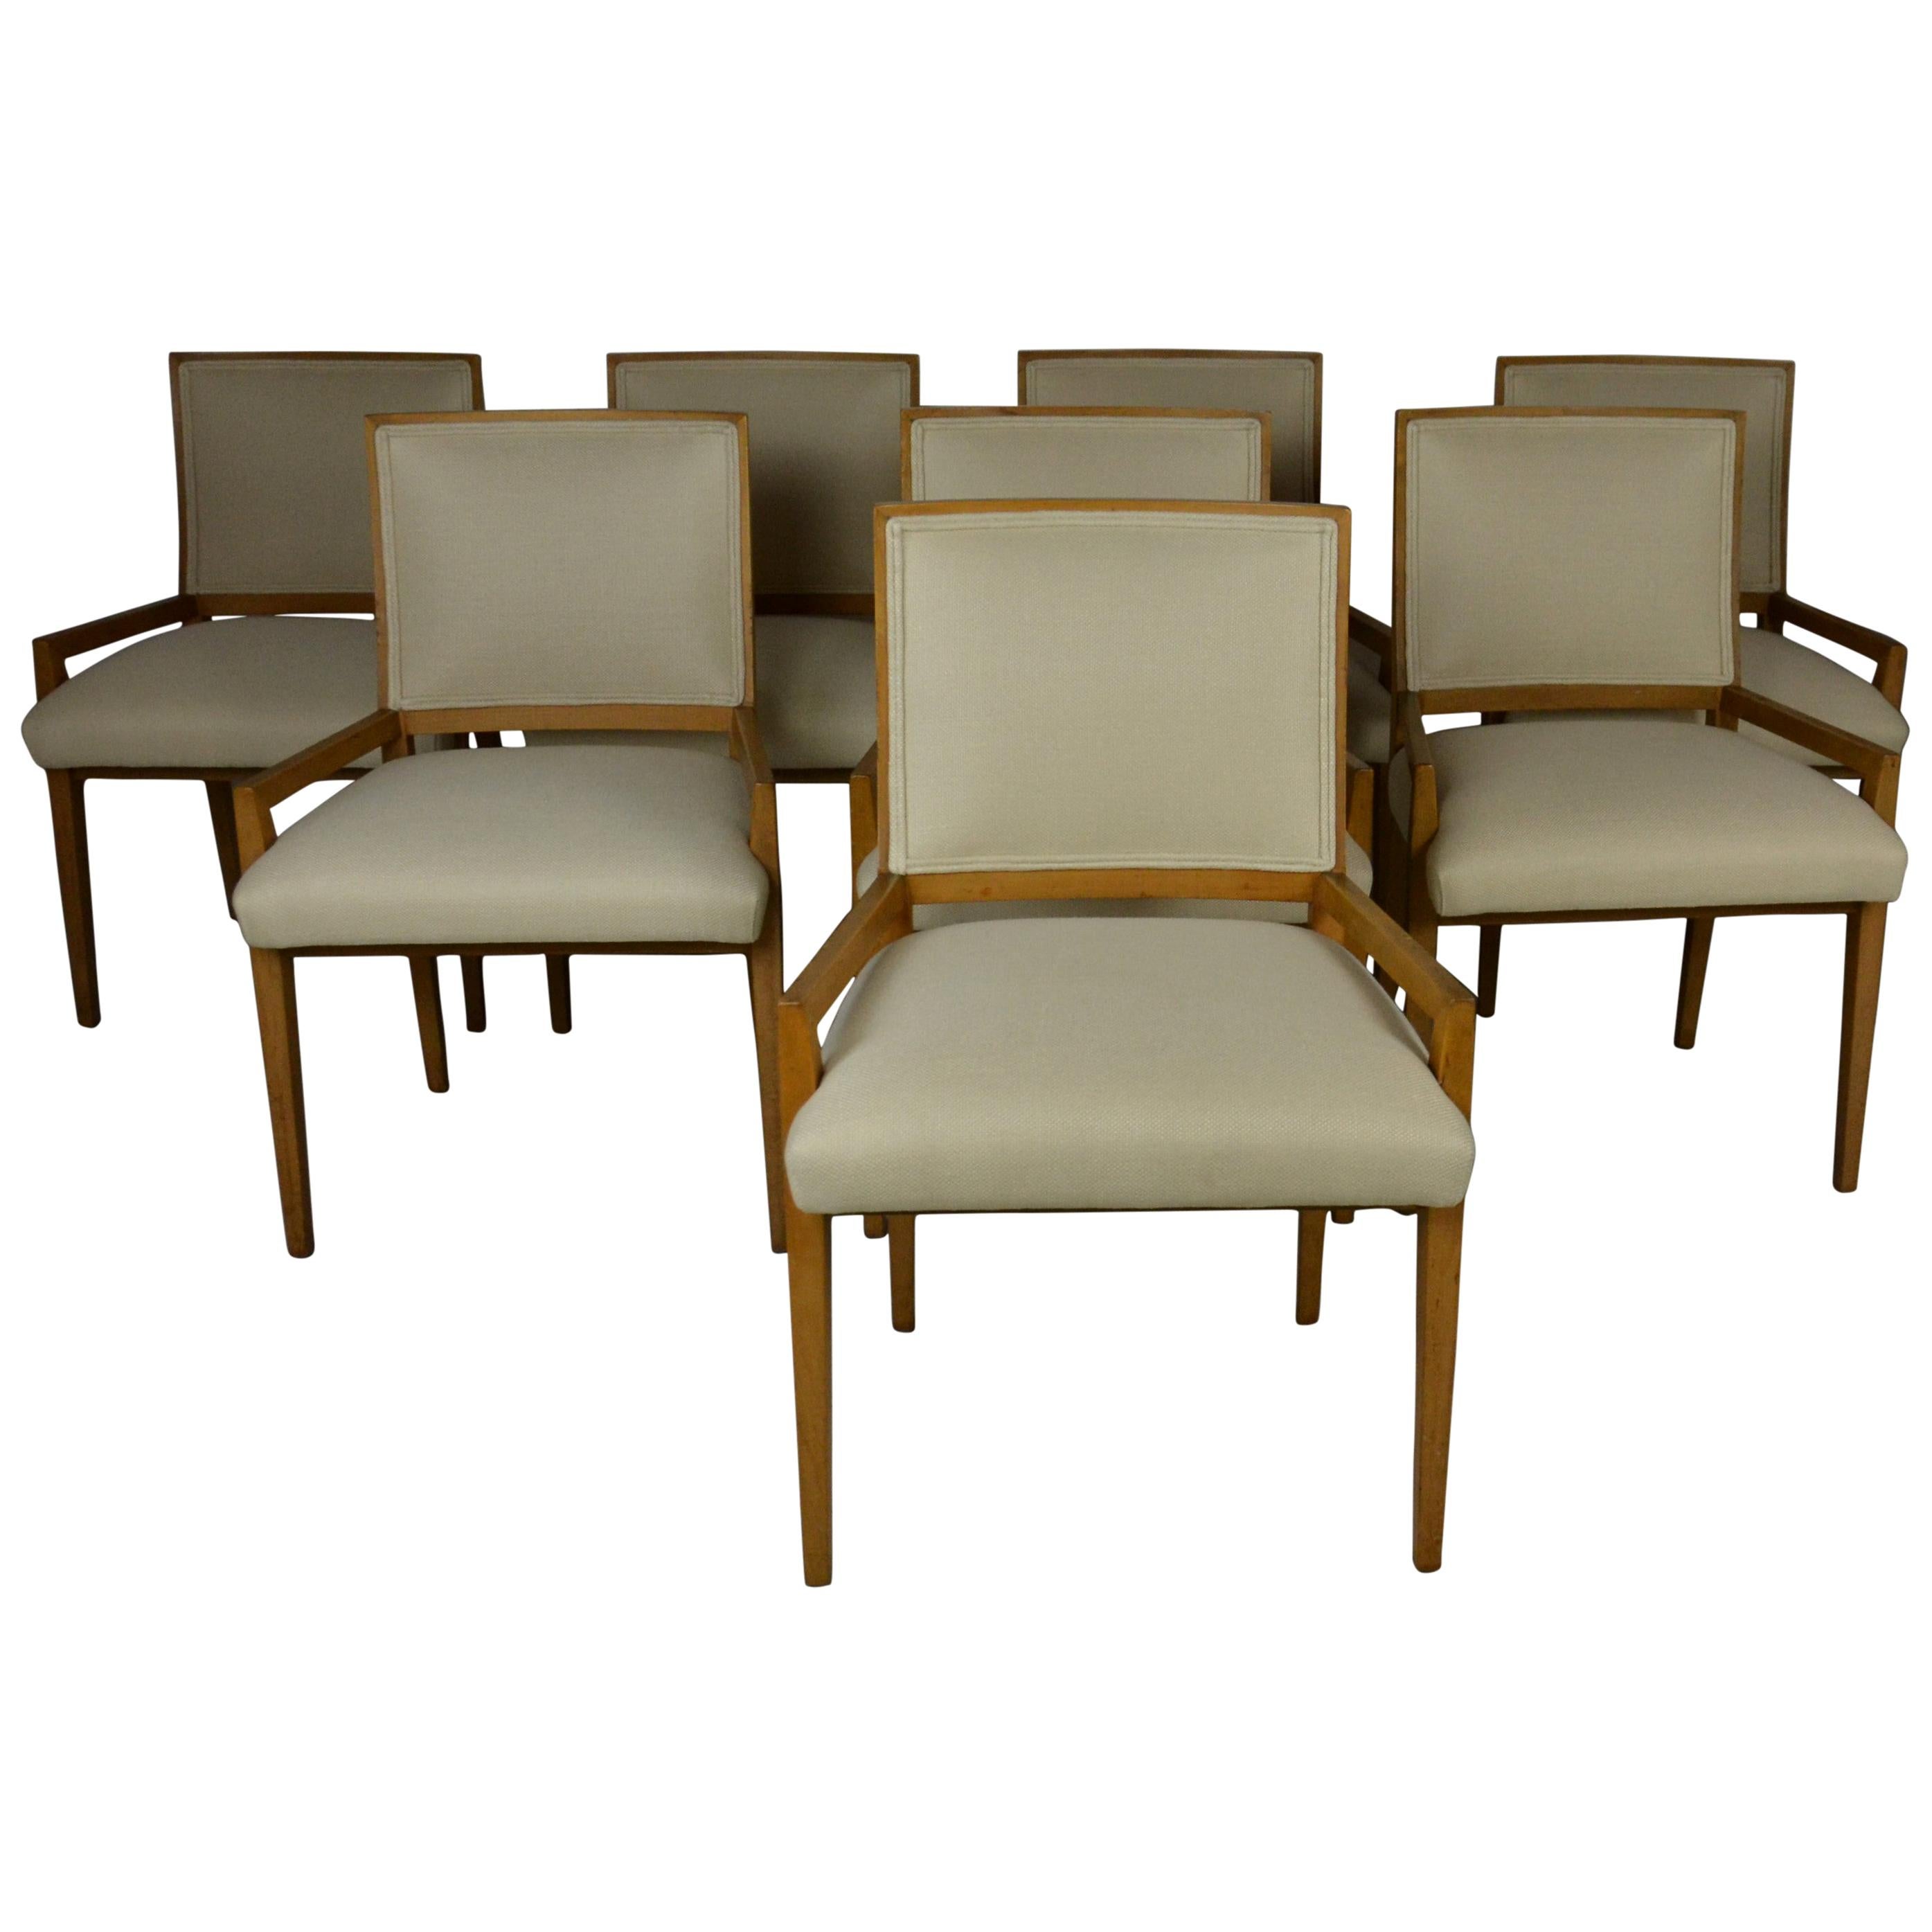 Set of 8 Midcentury Dining Chairs